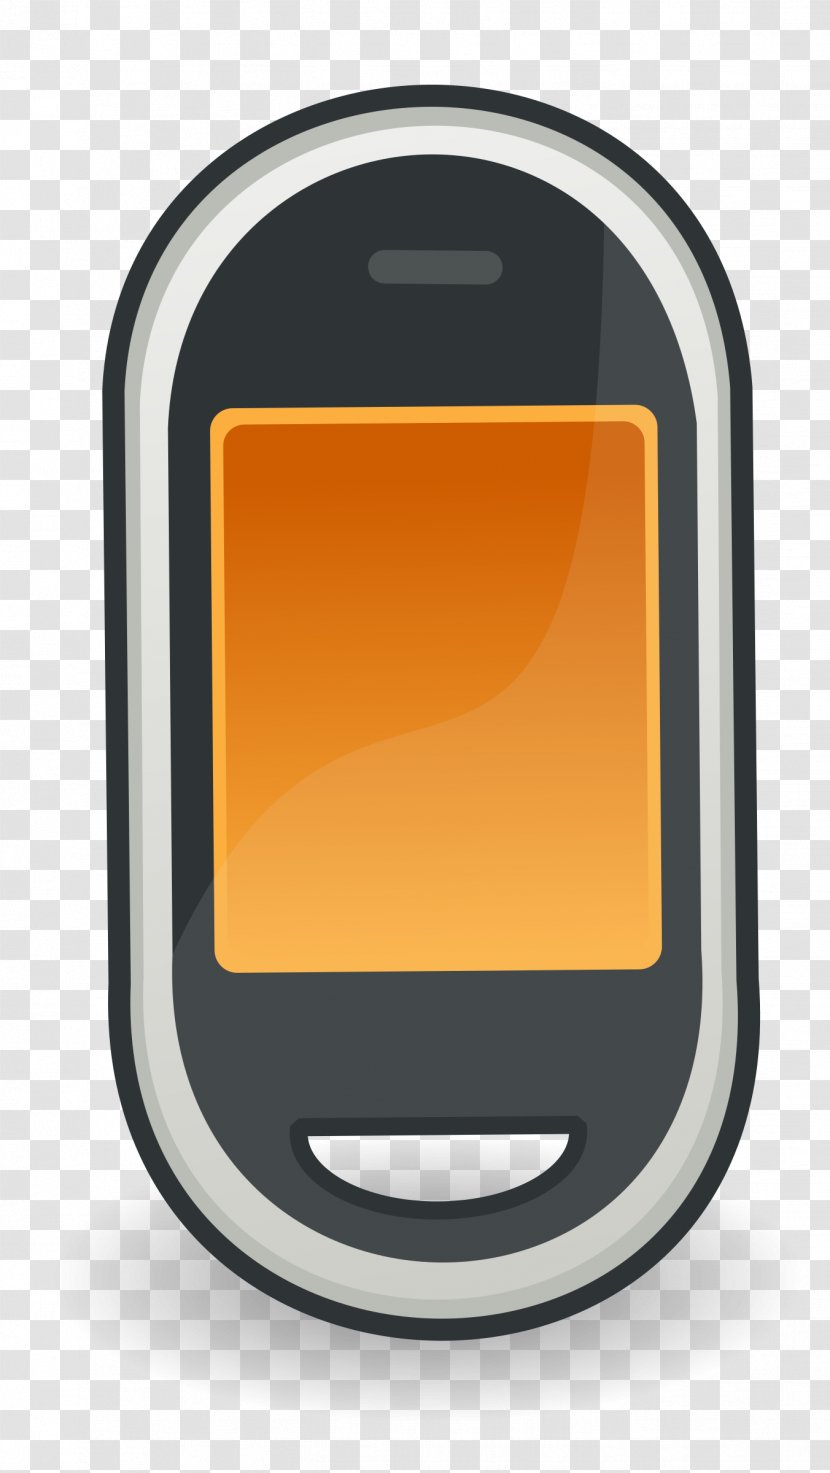 IPhone Smartphone Telephone - Portable Communications Device - Phone Transparent PNG